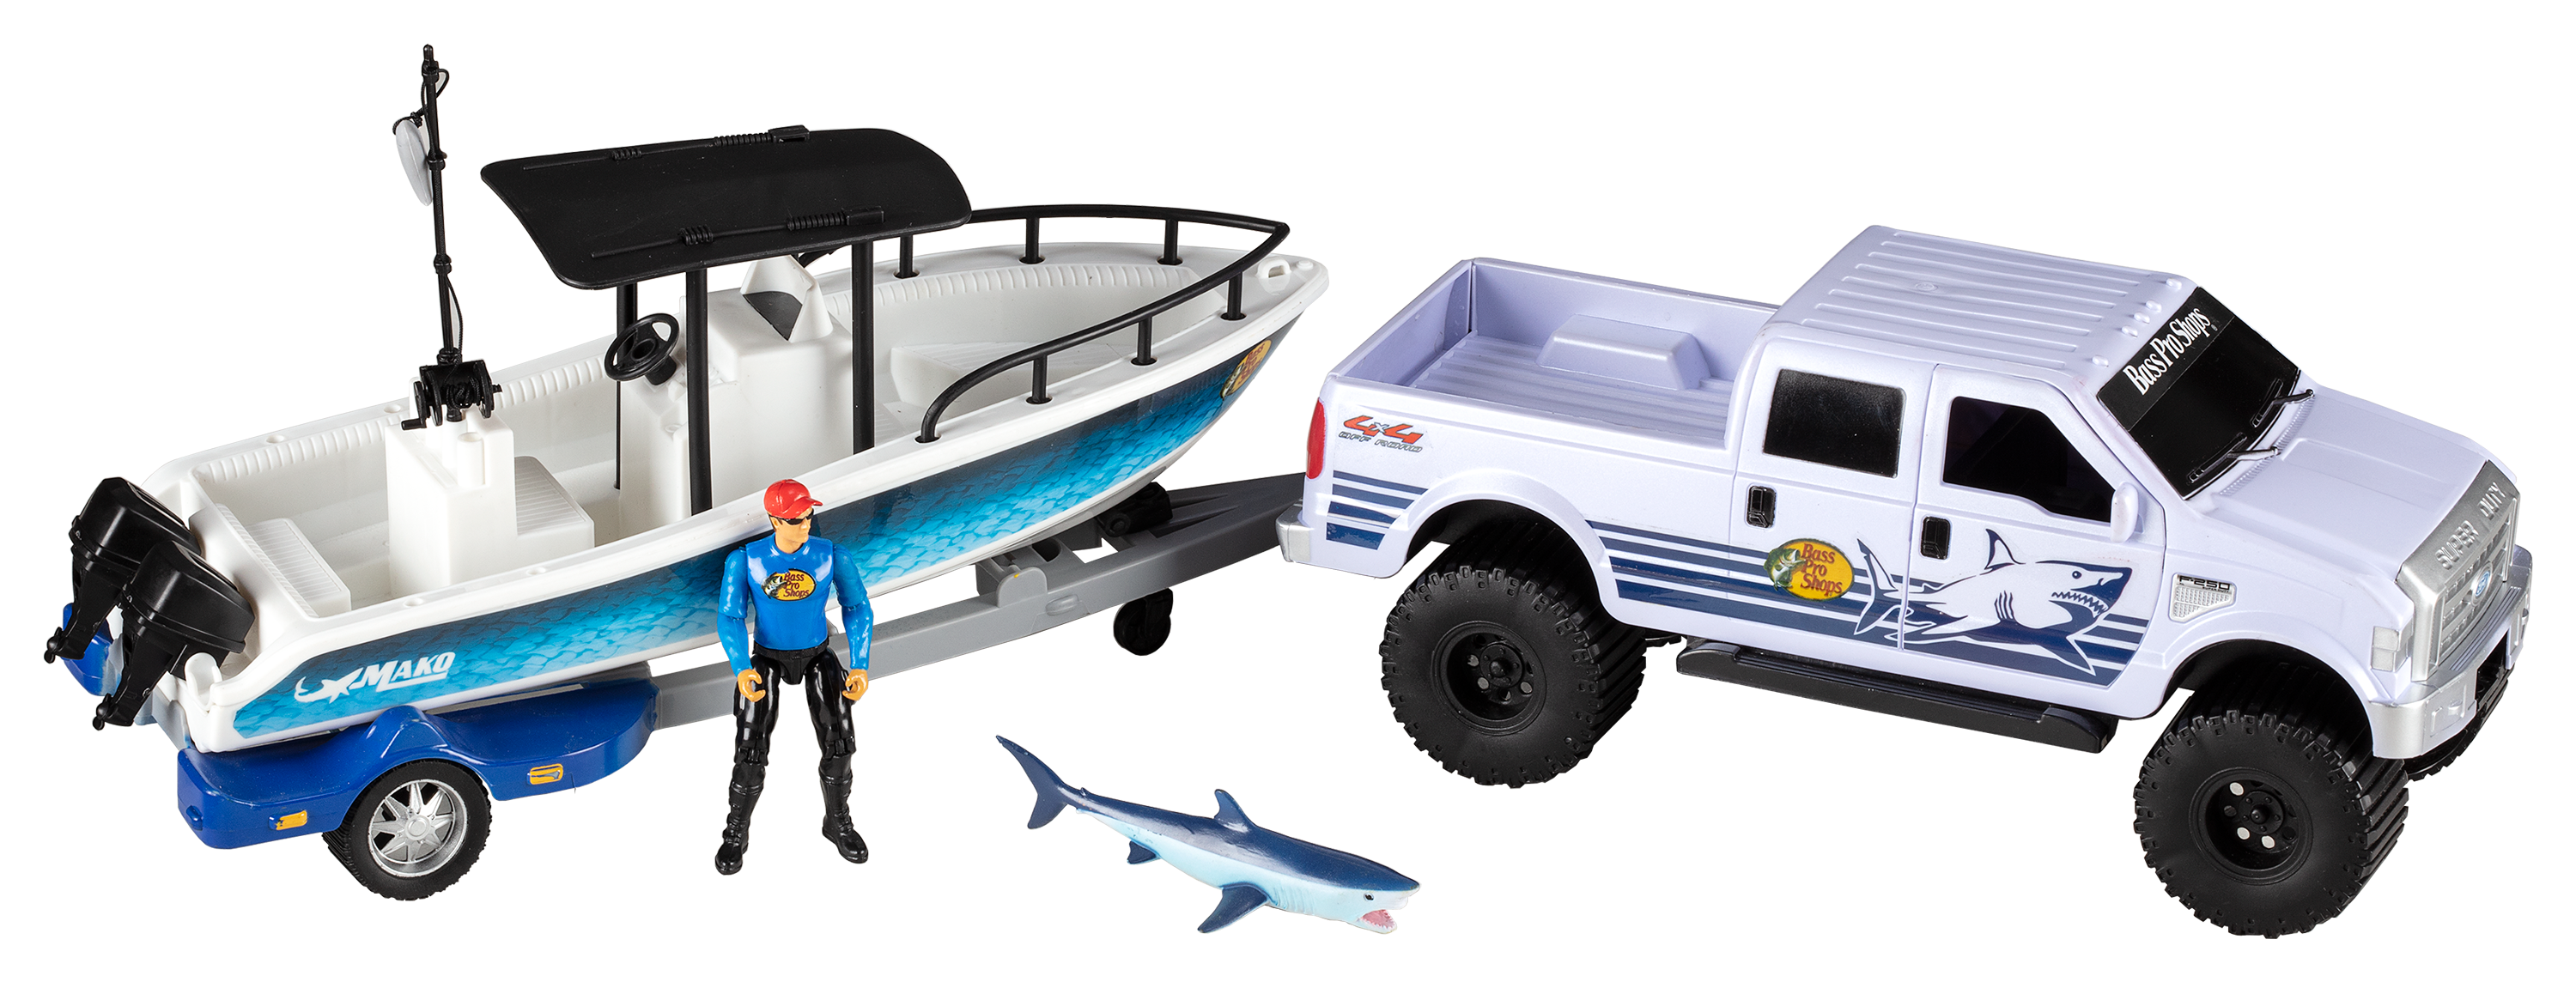 Bass Pro Shops Bass Boat Play Set for Kids